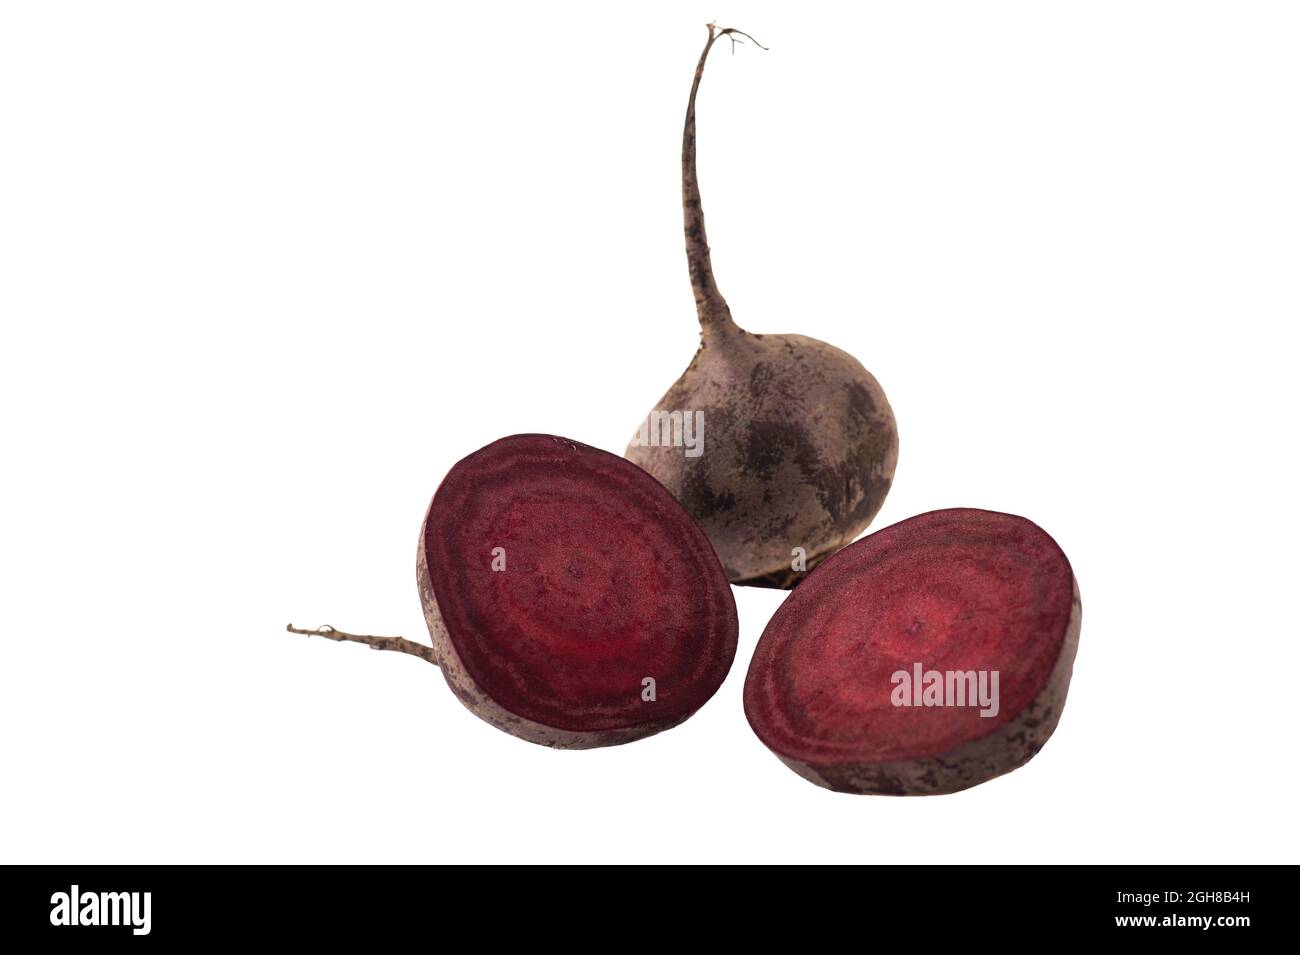 Organic red beet isolated on white background. Stock Photo